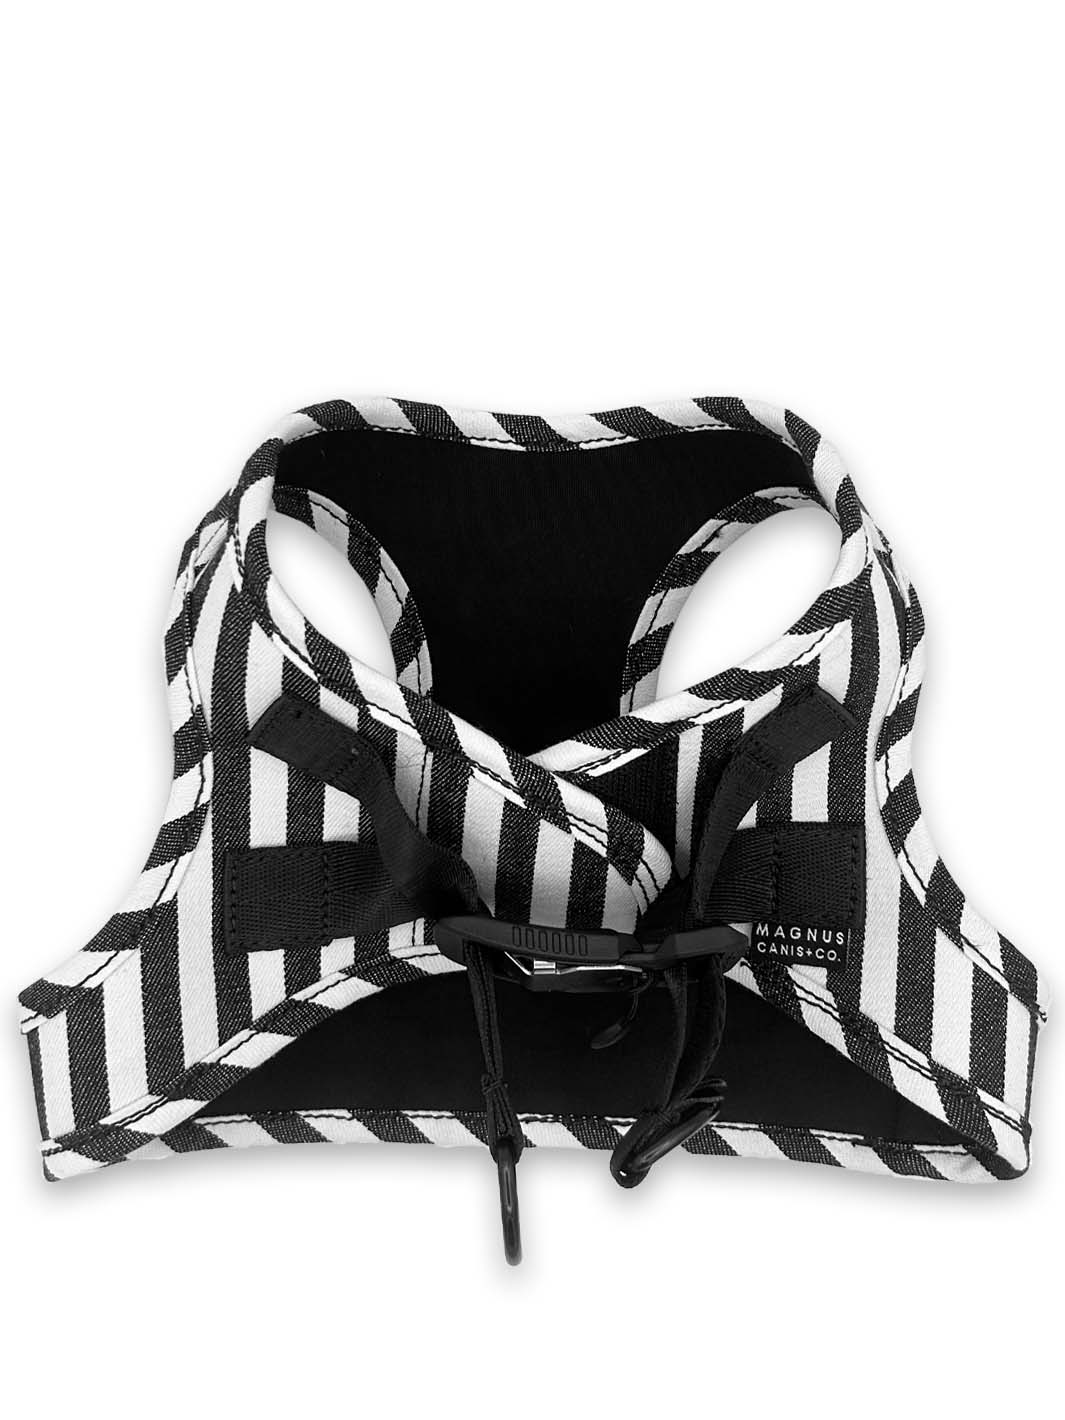 A white and black striped denim dog harness laying on a white surface.